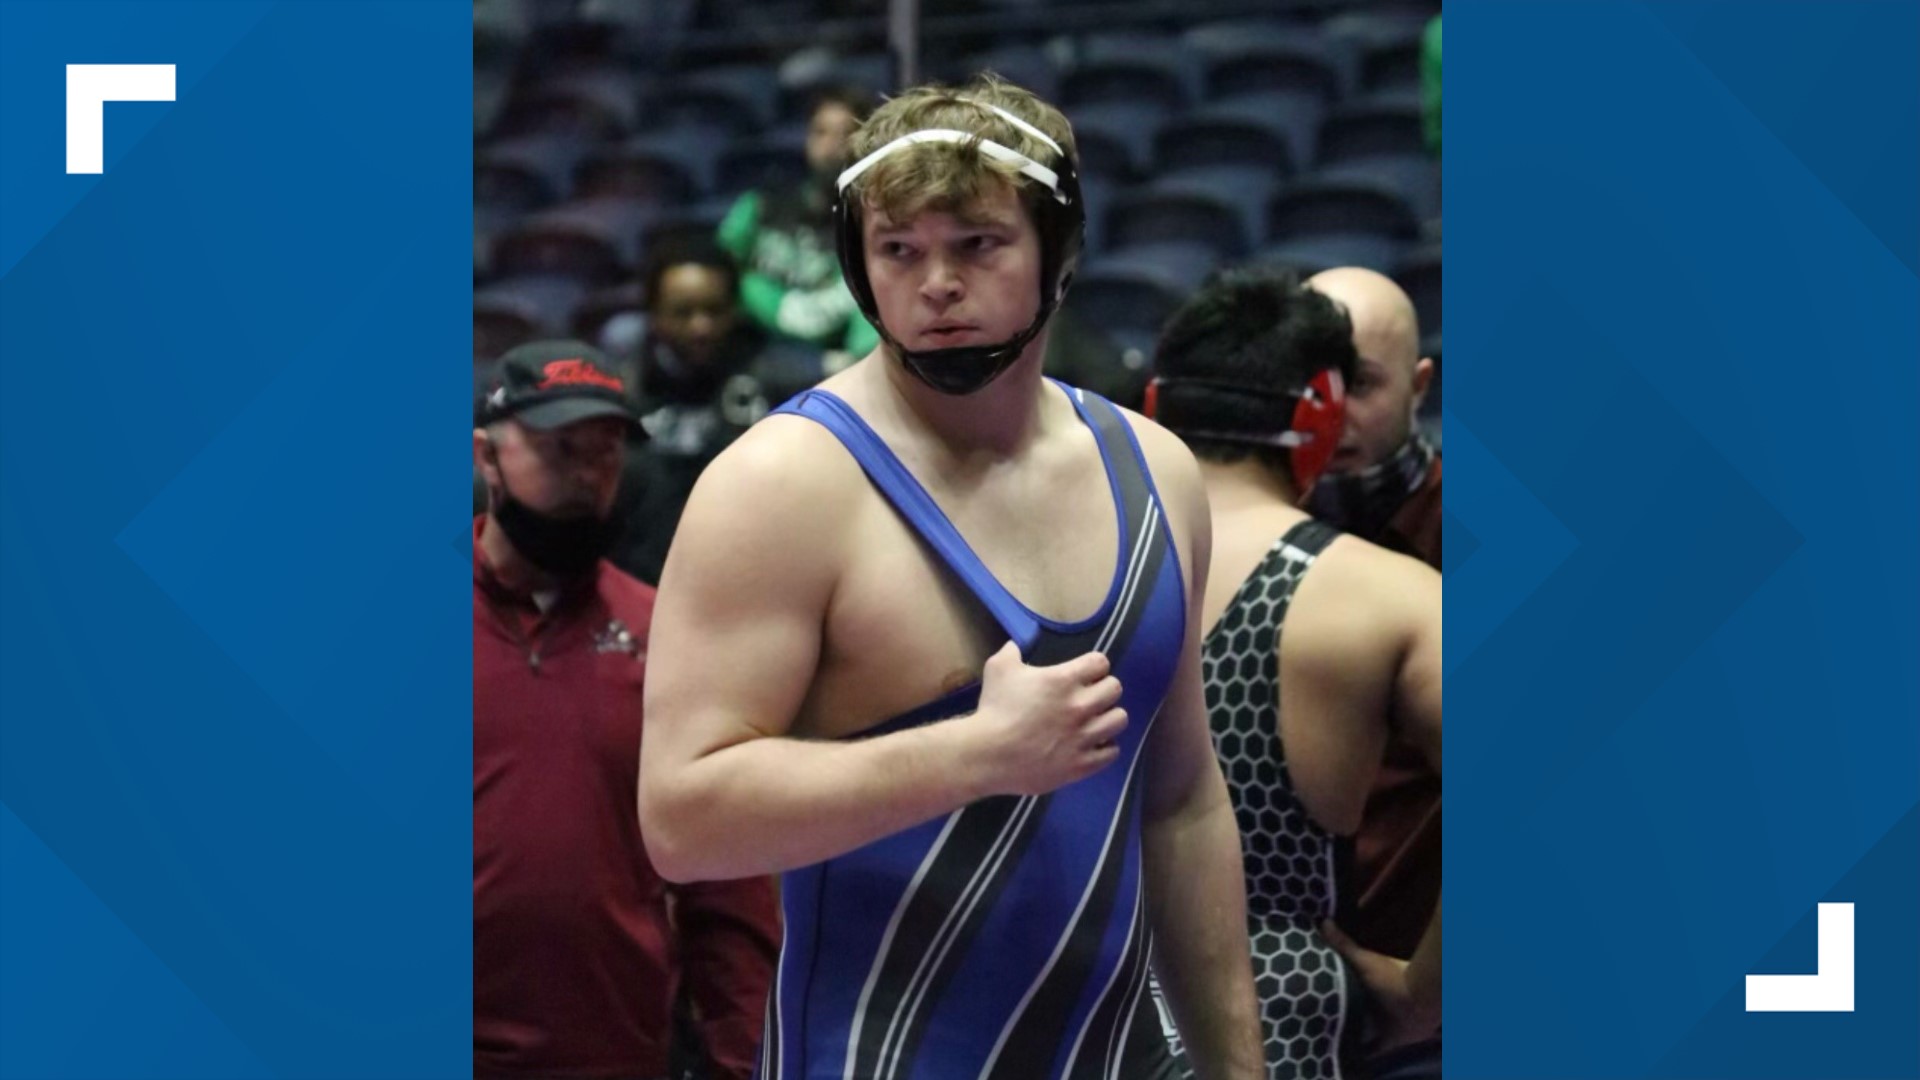 Horne is the #1 heavyweight high school wrestler in the country